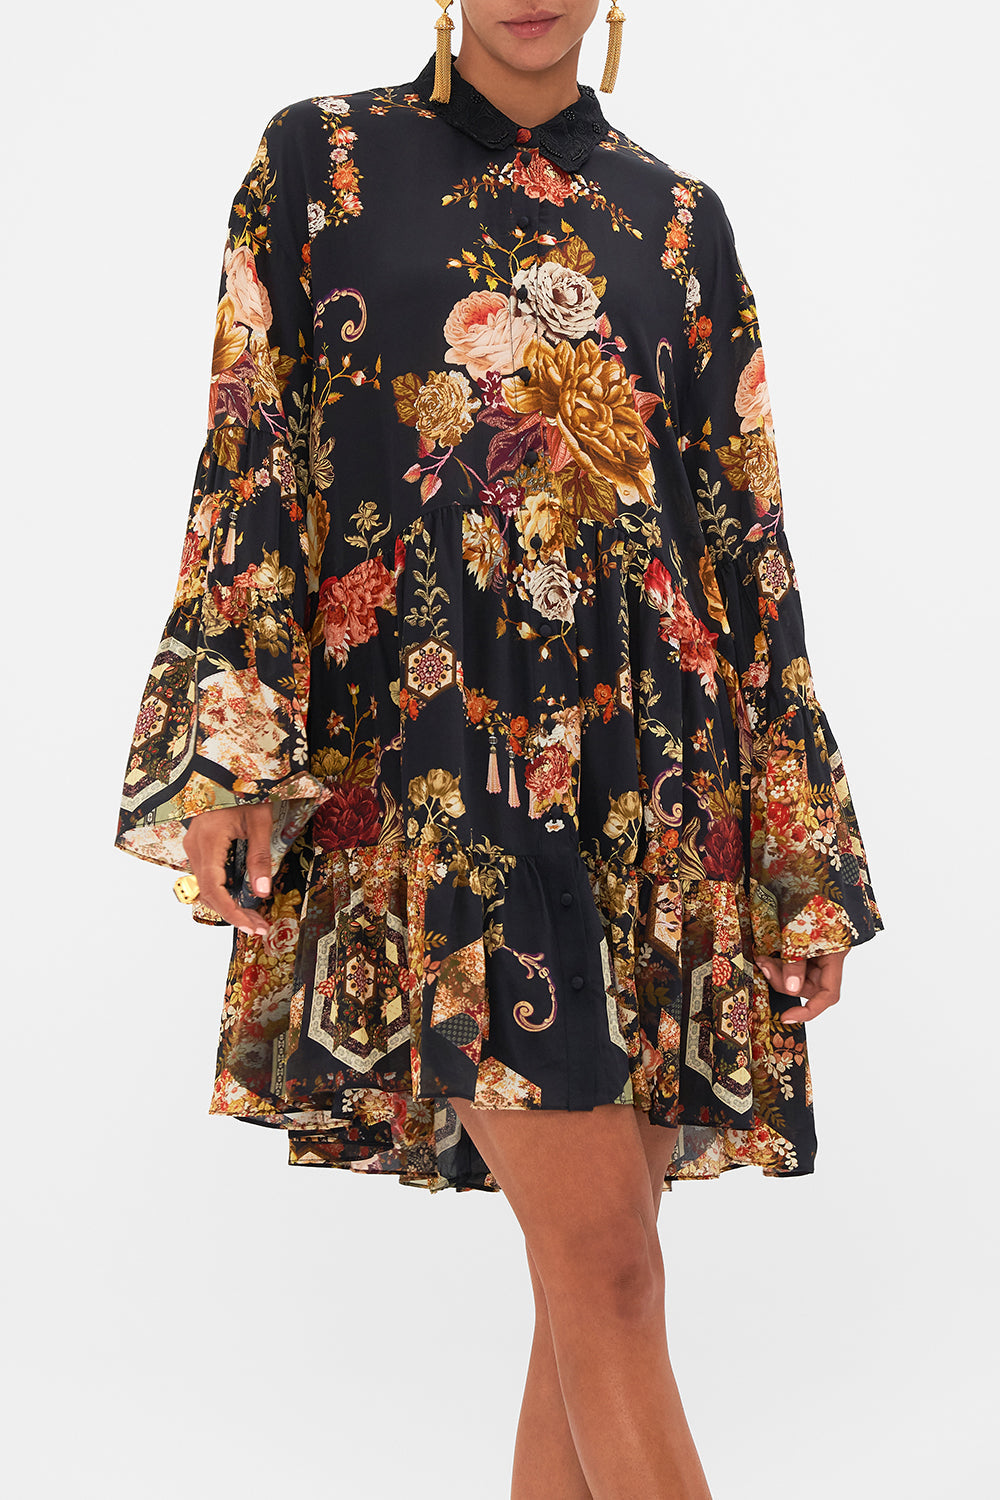 CAMILLA Floral Tiered Dress with Embroidered Collar in Stitched in Time